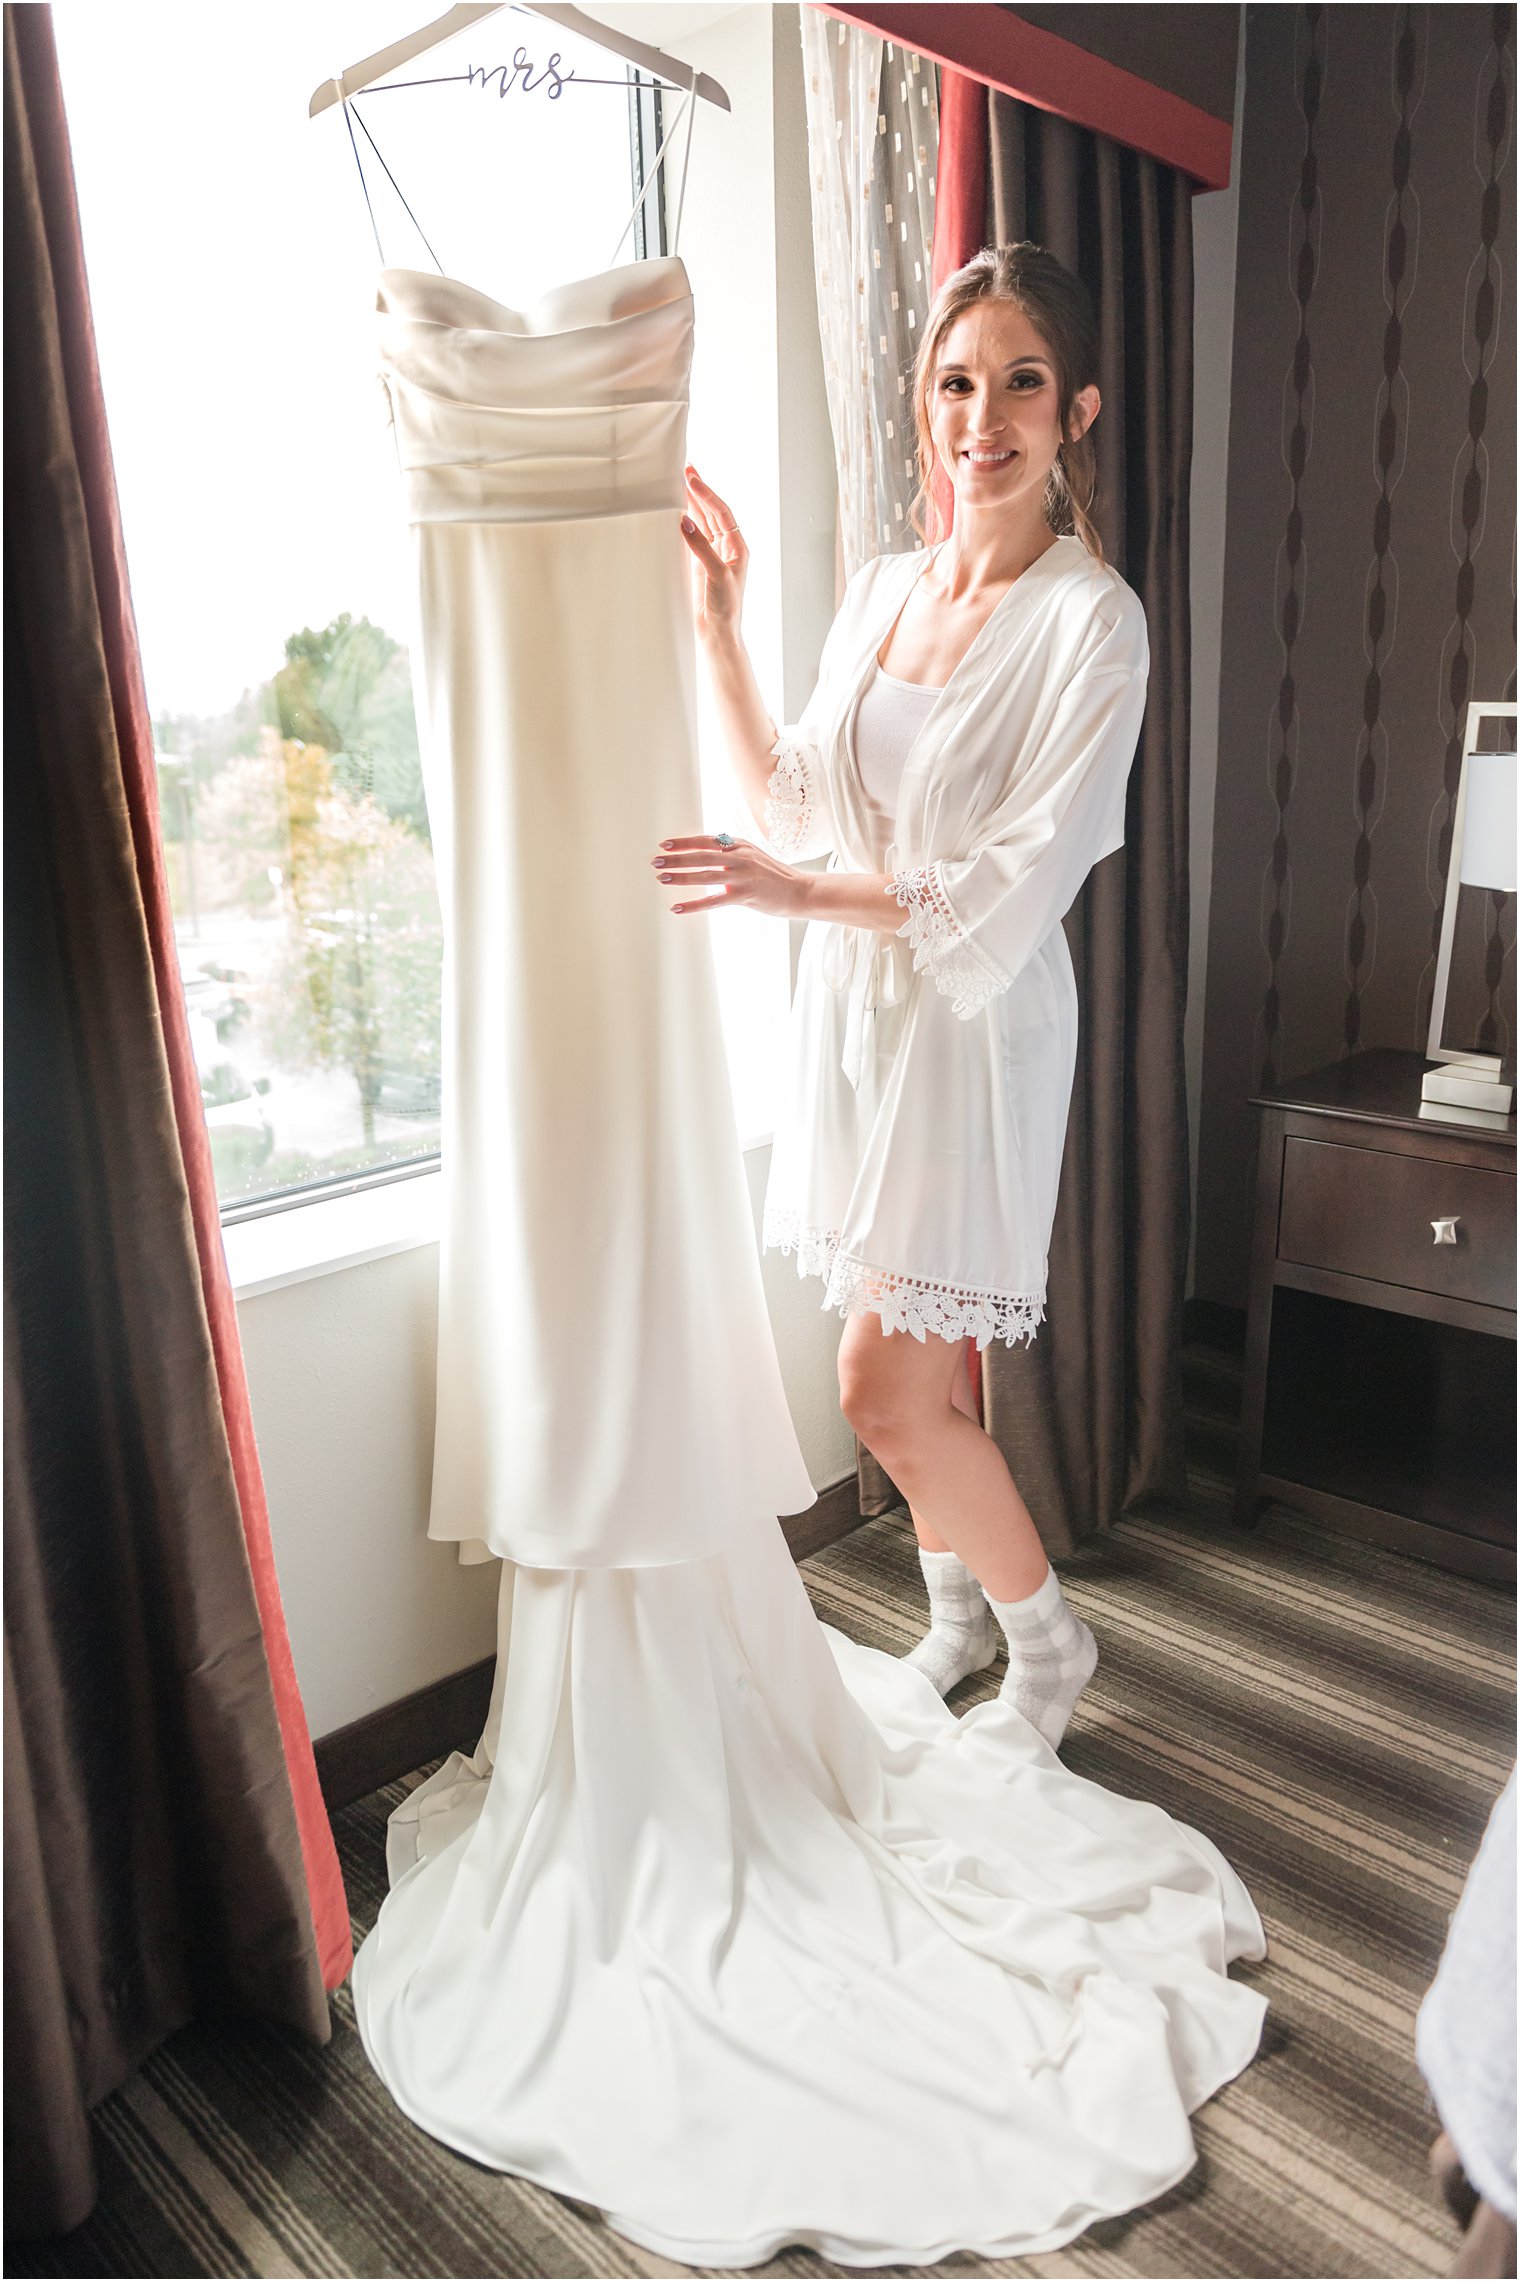 bride in white robe poses by modern wedding gown hanging in window 